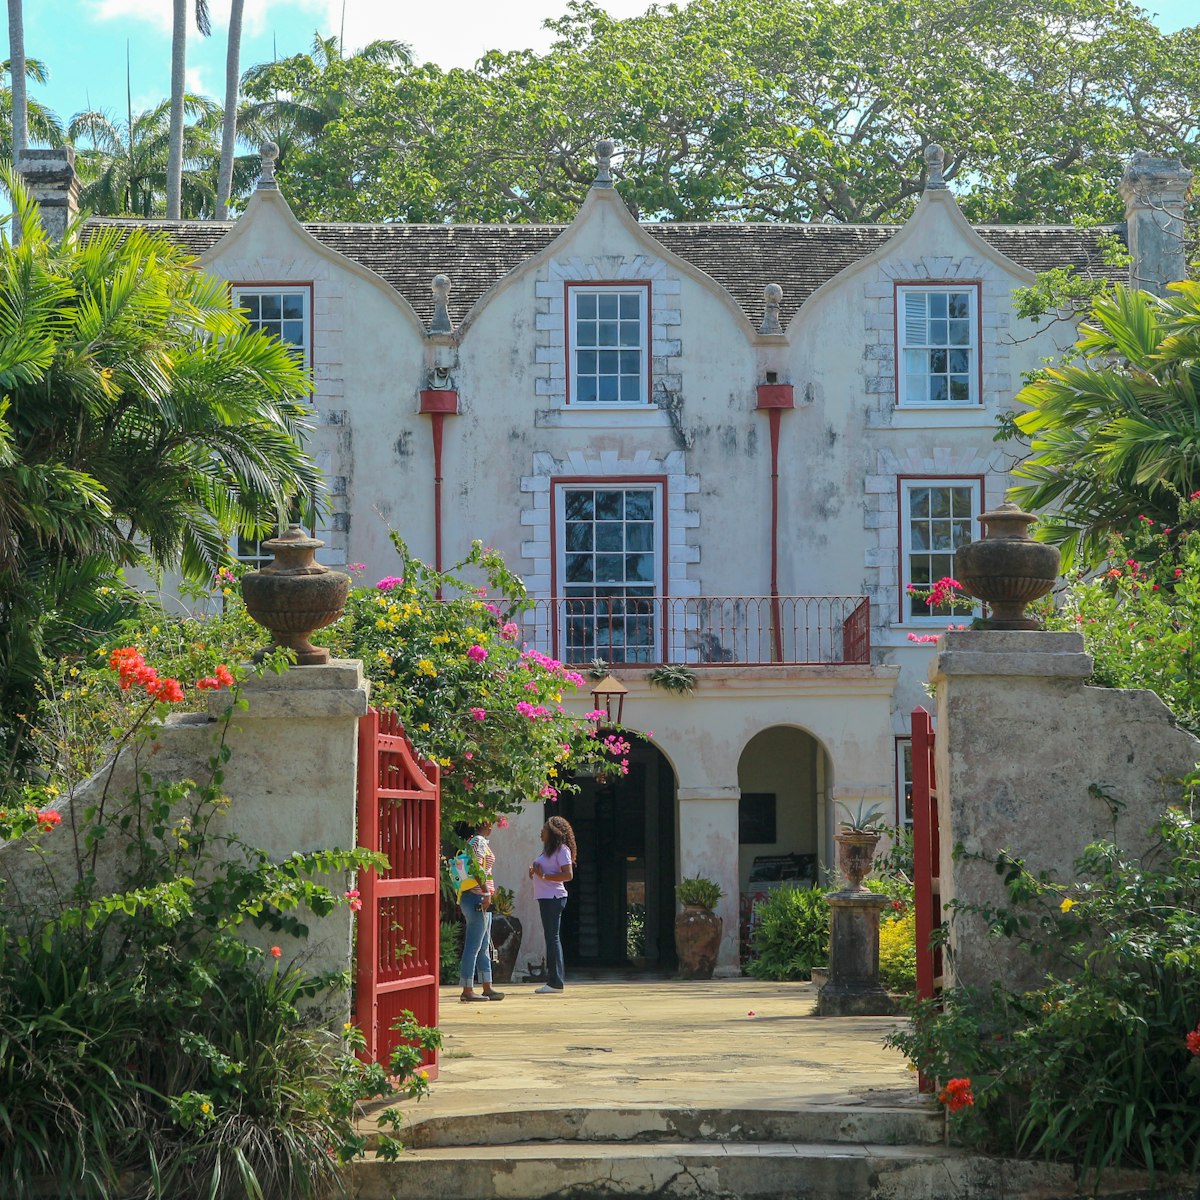 April 22, 2019: Exterior of St. Nicholas Abbey, a sugar cane plantation heritage museum and rum distillery.
1382812700
architecture, barbados, building, distillery, garden, gardens, heritage, historic, historical, landmark, museum, plantation, railway, rum, st. nicholas abbey, sugar can, tourism, travel, vacation